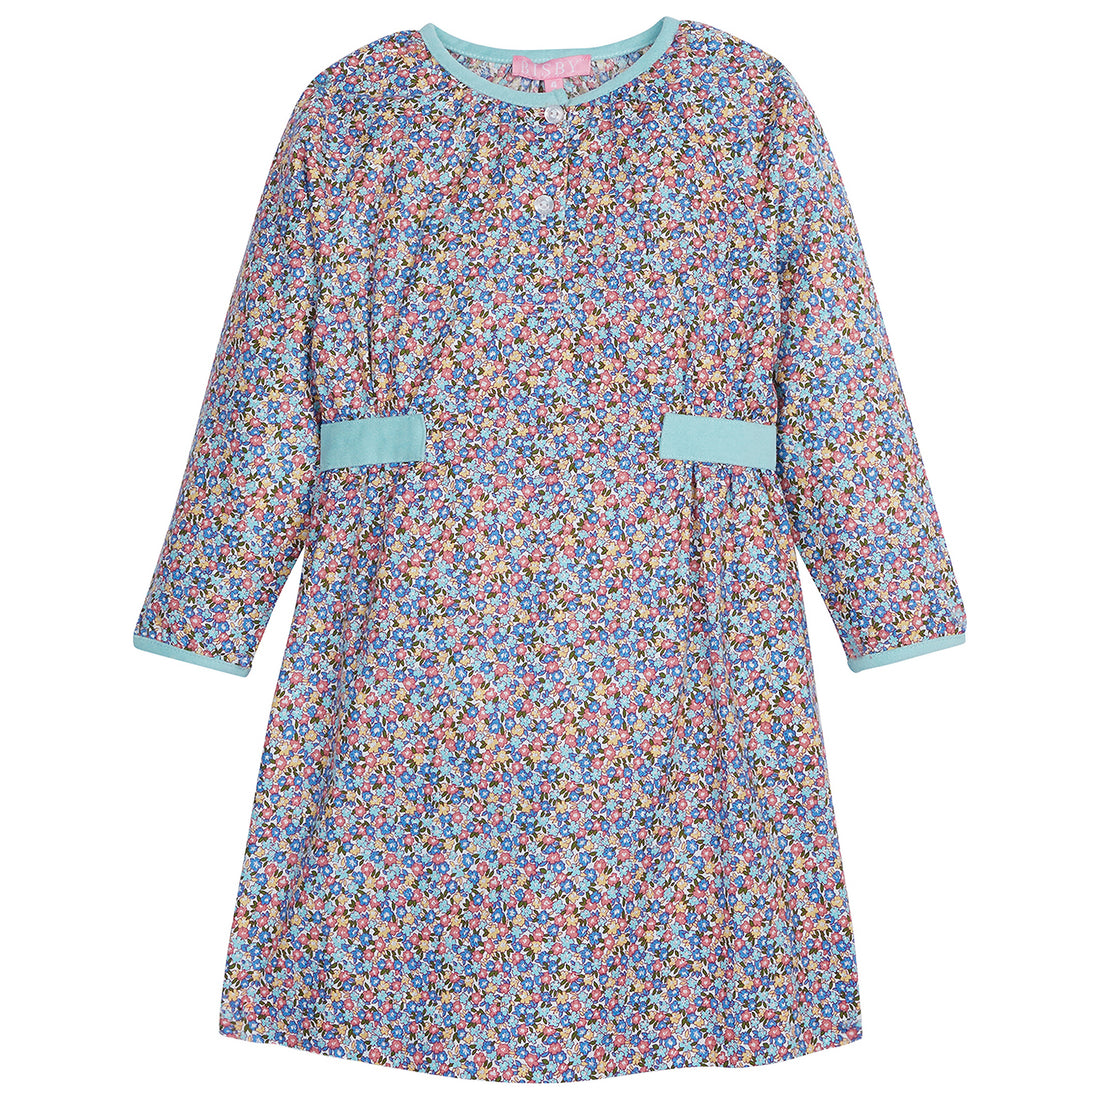 Long Sleeve dress with aqua colored trim on the neckline/ends of sleeves with a primary color small floral print. Also has a few buttons down the middle--SnowmassDress BISBY girls/teens